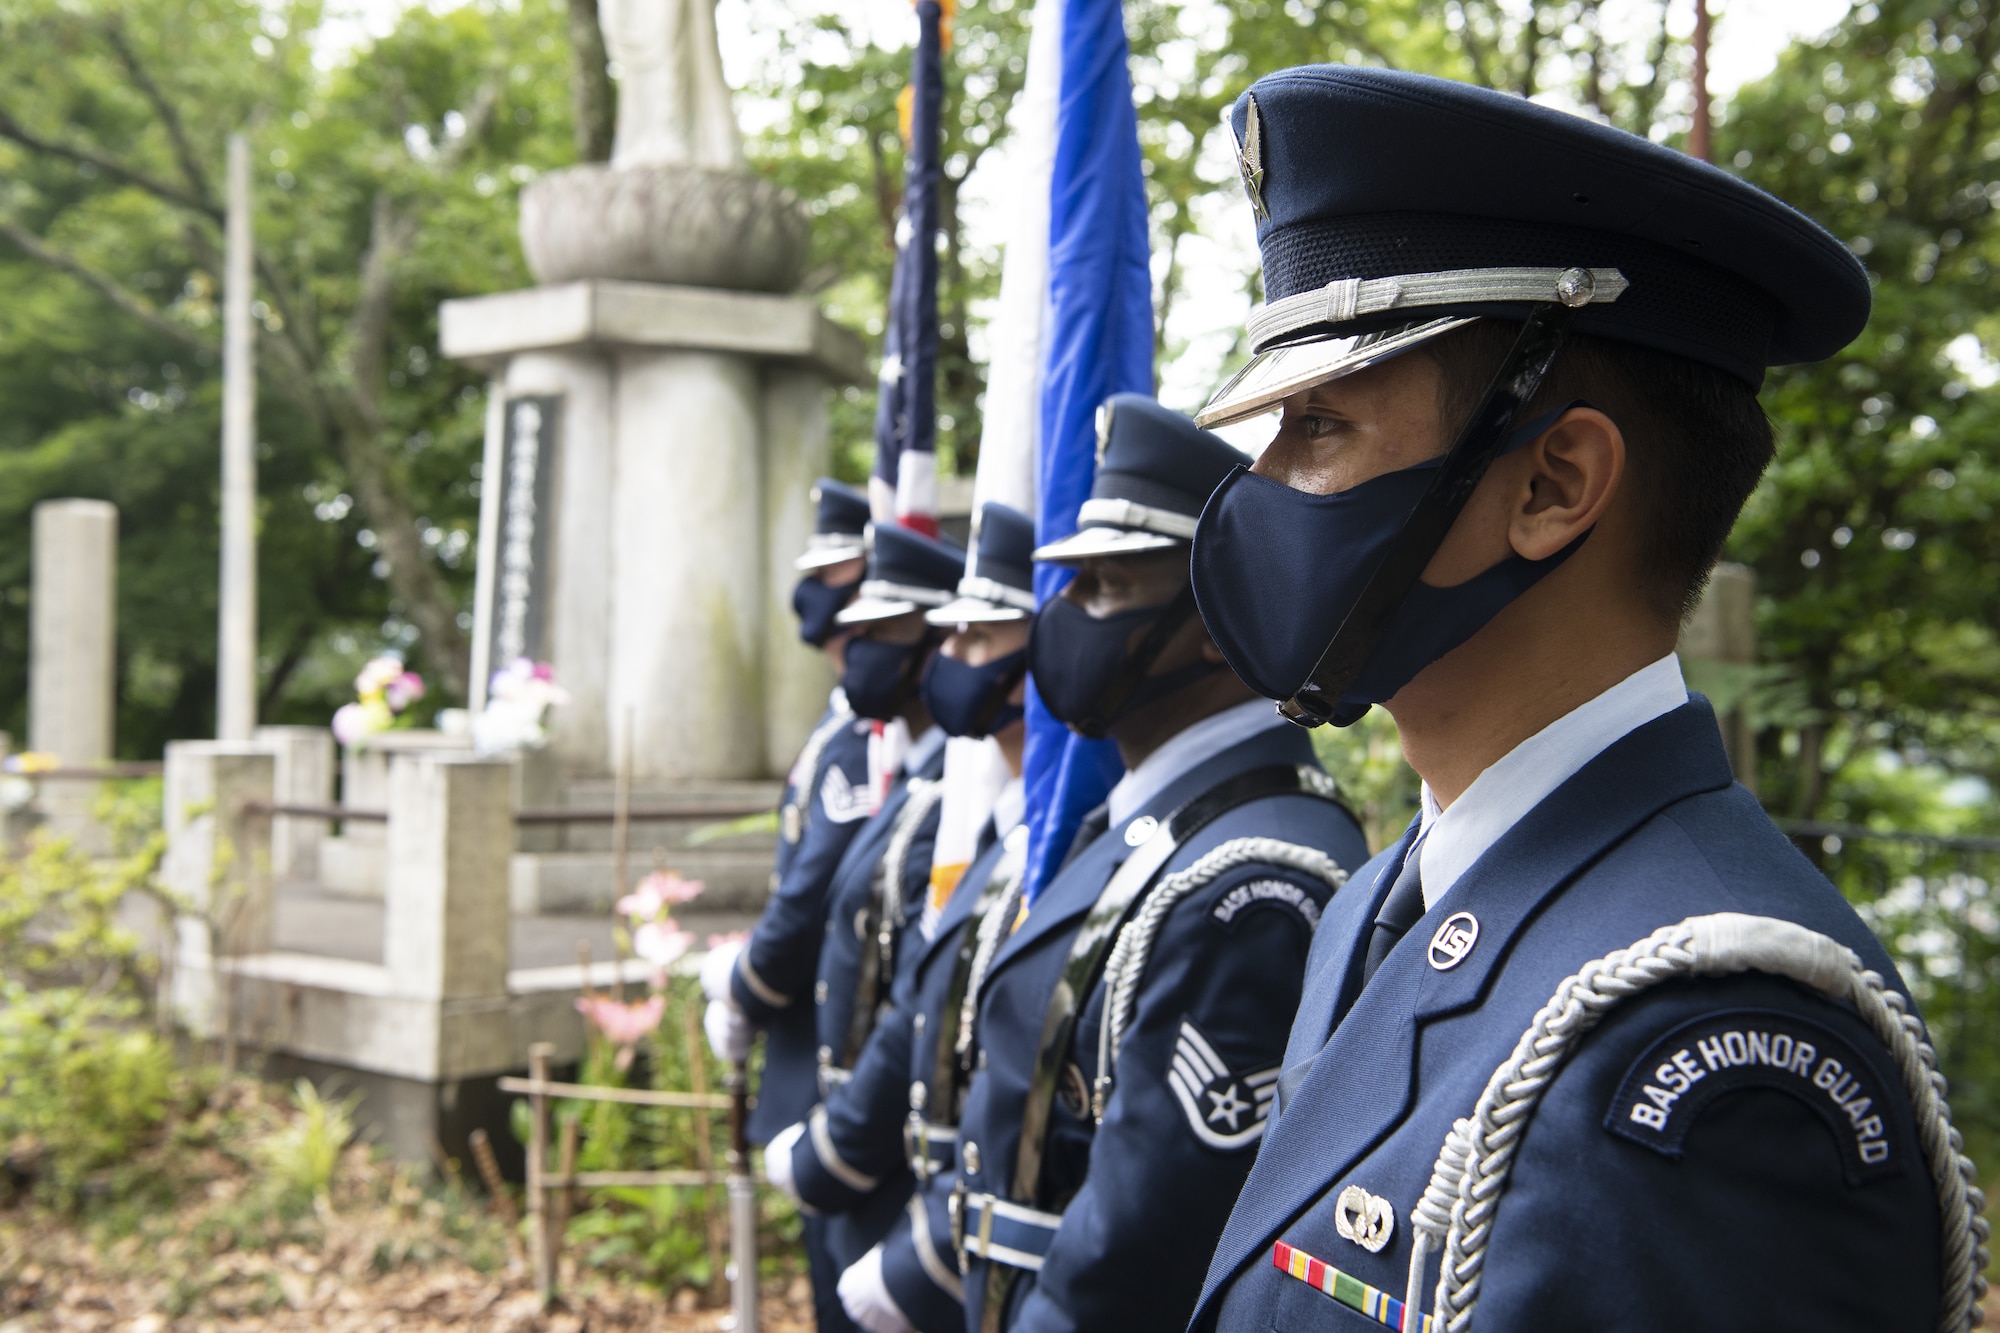 Honor Guard members assigned to Yokota Air Base, Japan, stand at parade rest prior to the U.S.-Japan Joint Memorial Service June 11, 2022, at Mt. Shizuhata, Shizuoka city, Japan. The memorial service provided participants the opportunity to honor those who lost their lives during a World War II air raid on June 20, 1945. During the raid, two U.S. Army Air Forces B-29 Superfortresses collided mid-air over Shizuoka City, resulting in the death of 23 Airmen on board the aircraft. Representatives of the U.S. Air Force’s Yokota Air Base, Japan Self-Defense Force, and Shizuoka City rendered their respects to the Airmen and Japanese civilians who lost their lives as a result of the tragedy. (U.S. Air Force photo by Tech. Sgt. Christopher Hubenthal)